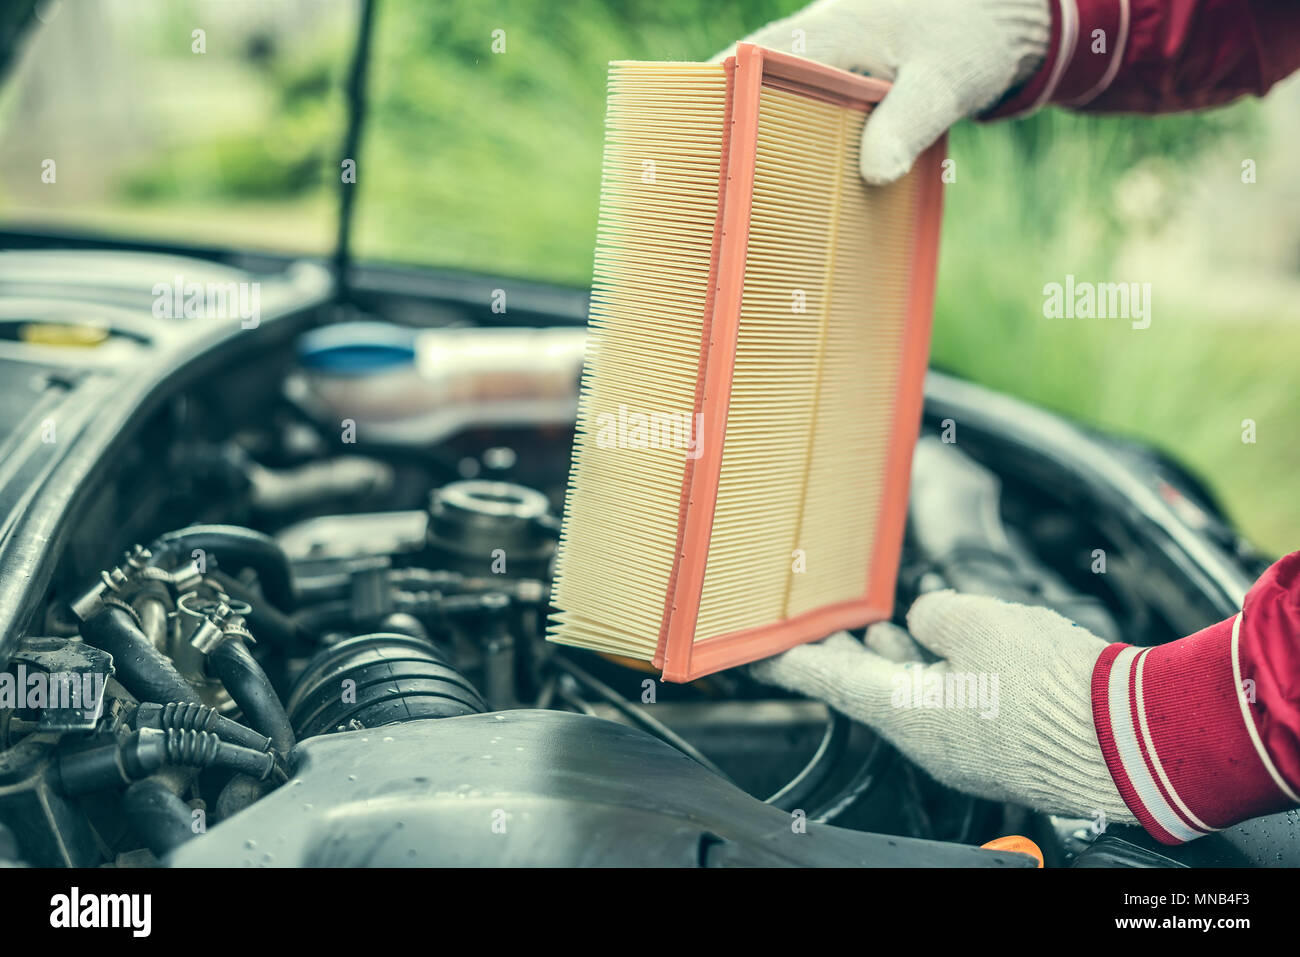 The auto mechanic replaces the car's air filter. Stock Photo